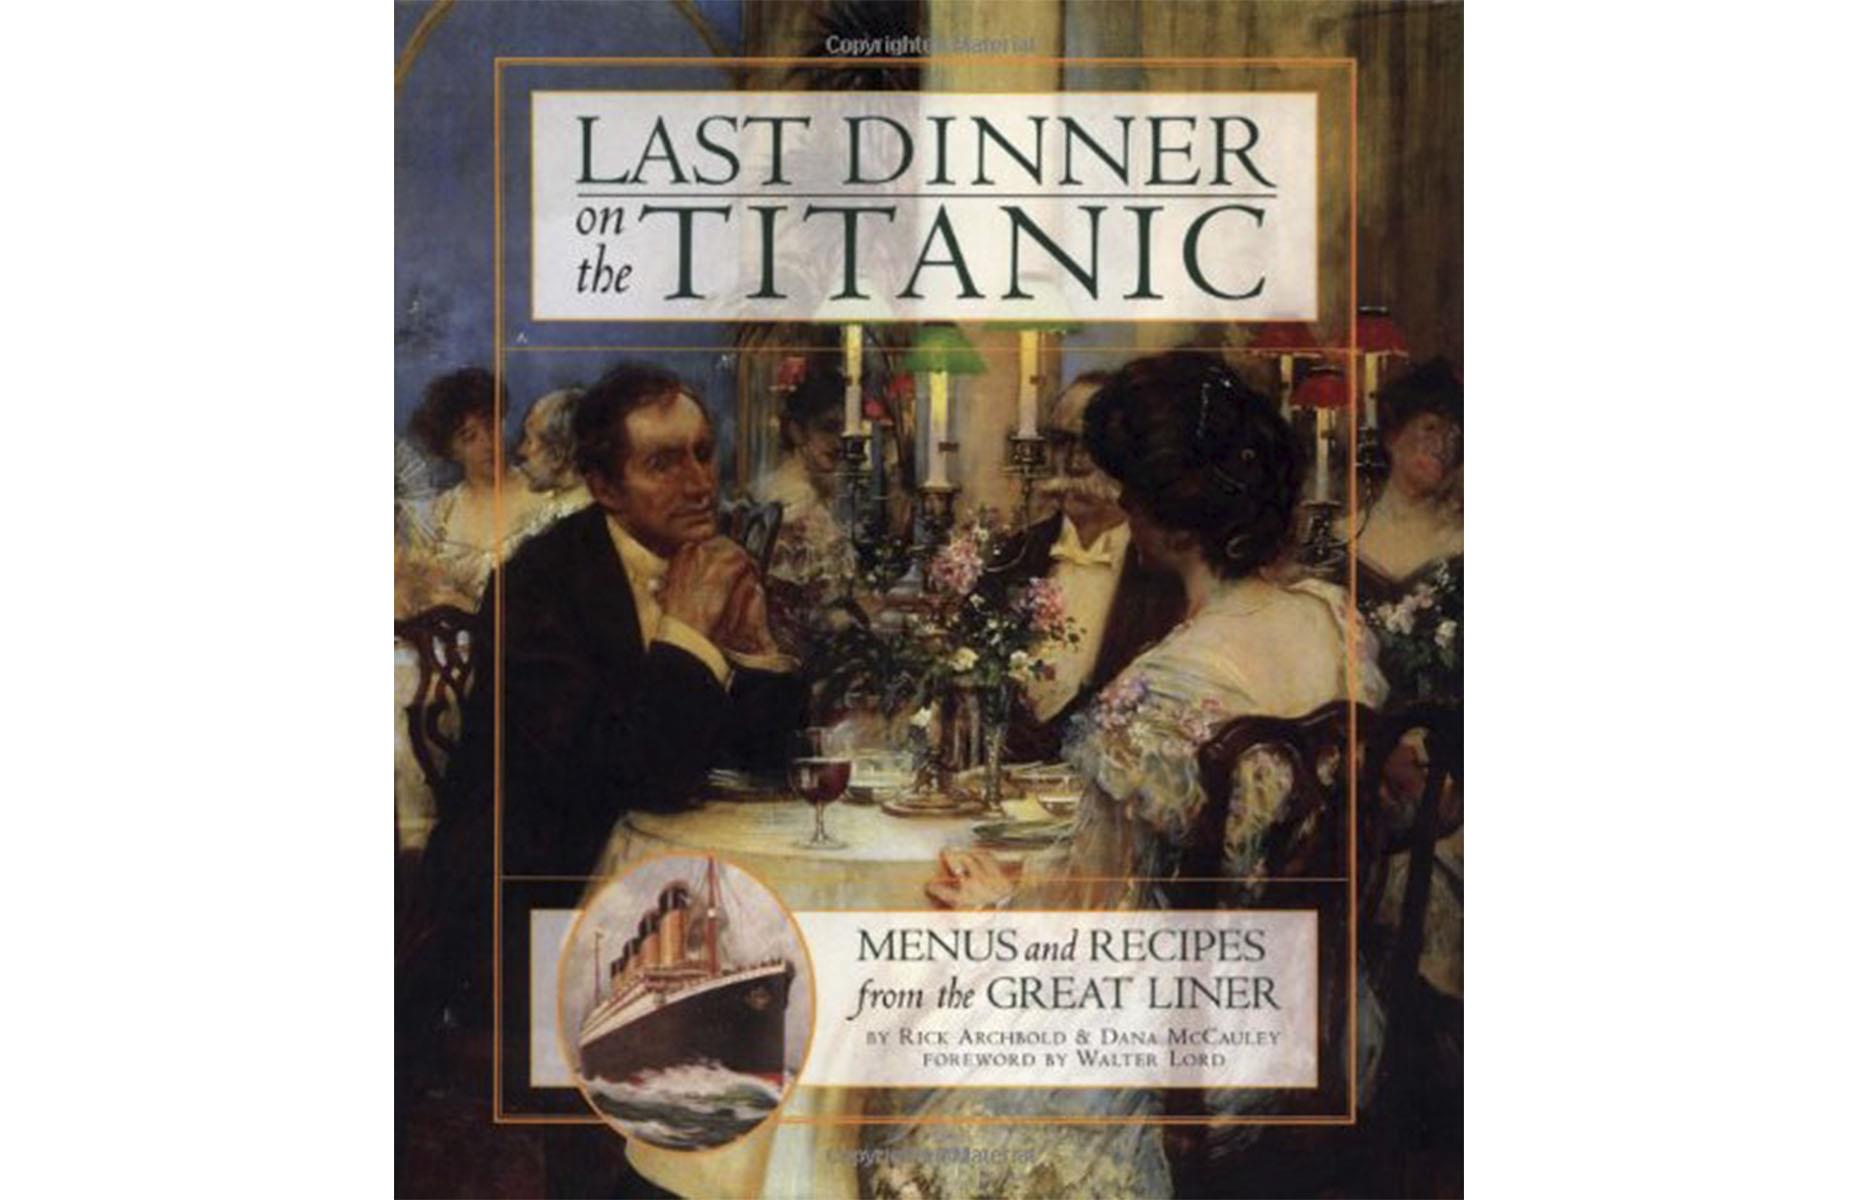 <p>To learn more about the food and drink served on the doomed liner read Rick Archebold’s <em><a href="https://www.amazon.co.uk/Last-Dinner-Titanic-Menus-Recipes/dp/078686303X/ref=sr_1_1?ie=UTF8&qid=1509983943&sr=8-1&keywords=The+Last+Dinner+on+the+Titanic">The Last Dinner on the Titanic</a></em> and <a href="https://www.amazon.co.uk/Titanic-Dinner-Served-Yvonne-Hume/dp/1840334843/ref=sr_1_2?s=books&ie=UTF8&qid=1509983990&sr=1-2&keywords=Dinner+is+Served"><em>RMS Titanic Dinner is Served</em> </a>by Yvonne Hulme, the great niece of musician John Law Hulme who died while working on the ship.</p>  <p><strong><a href="https://www.loveexploring.com/galleries/72633/secrets-of-the-titanic-life-onboard-the-worlds-most-famous-ship?page=1">Discover more secrets of life onboard the Titanic</a></strong></p>